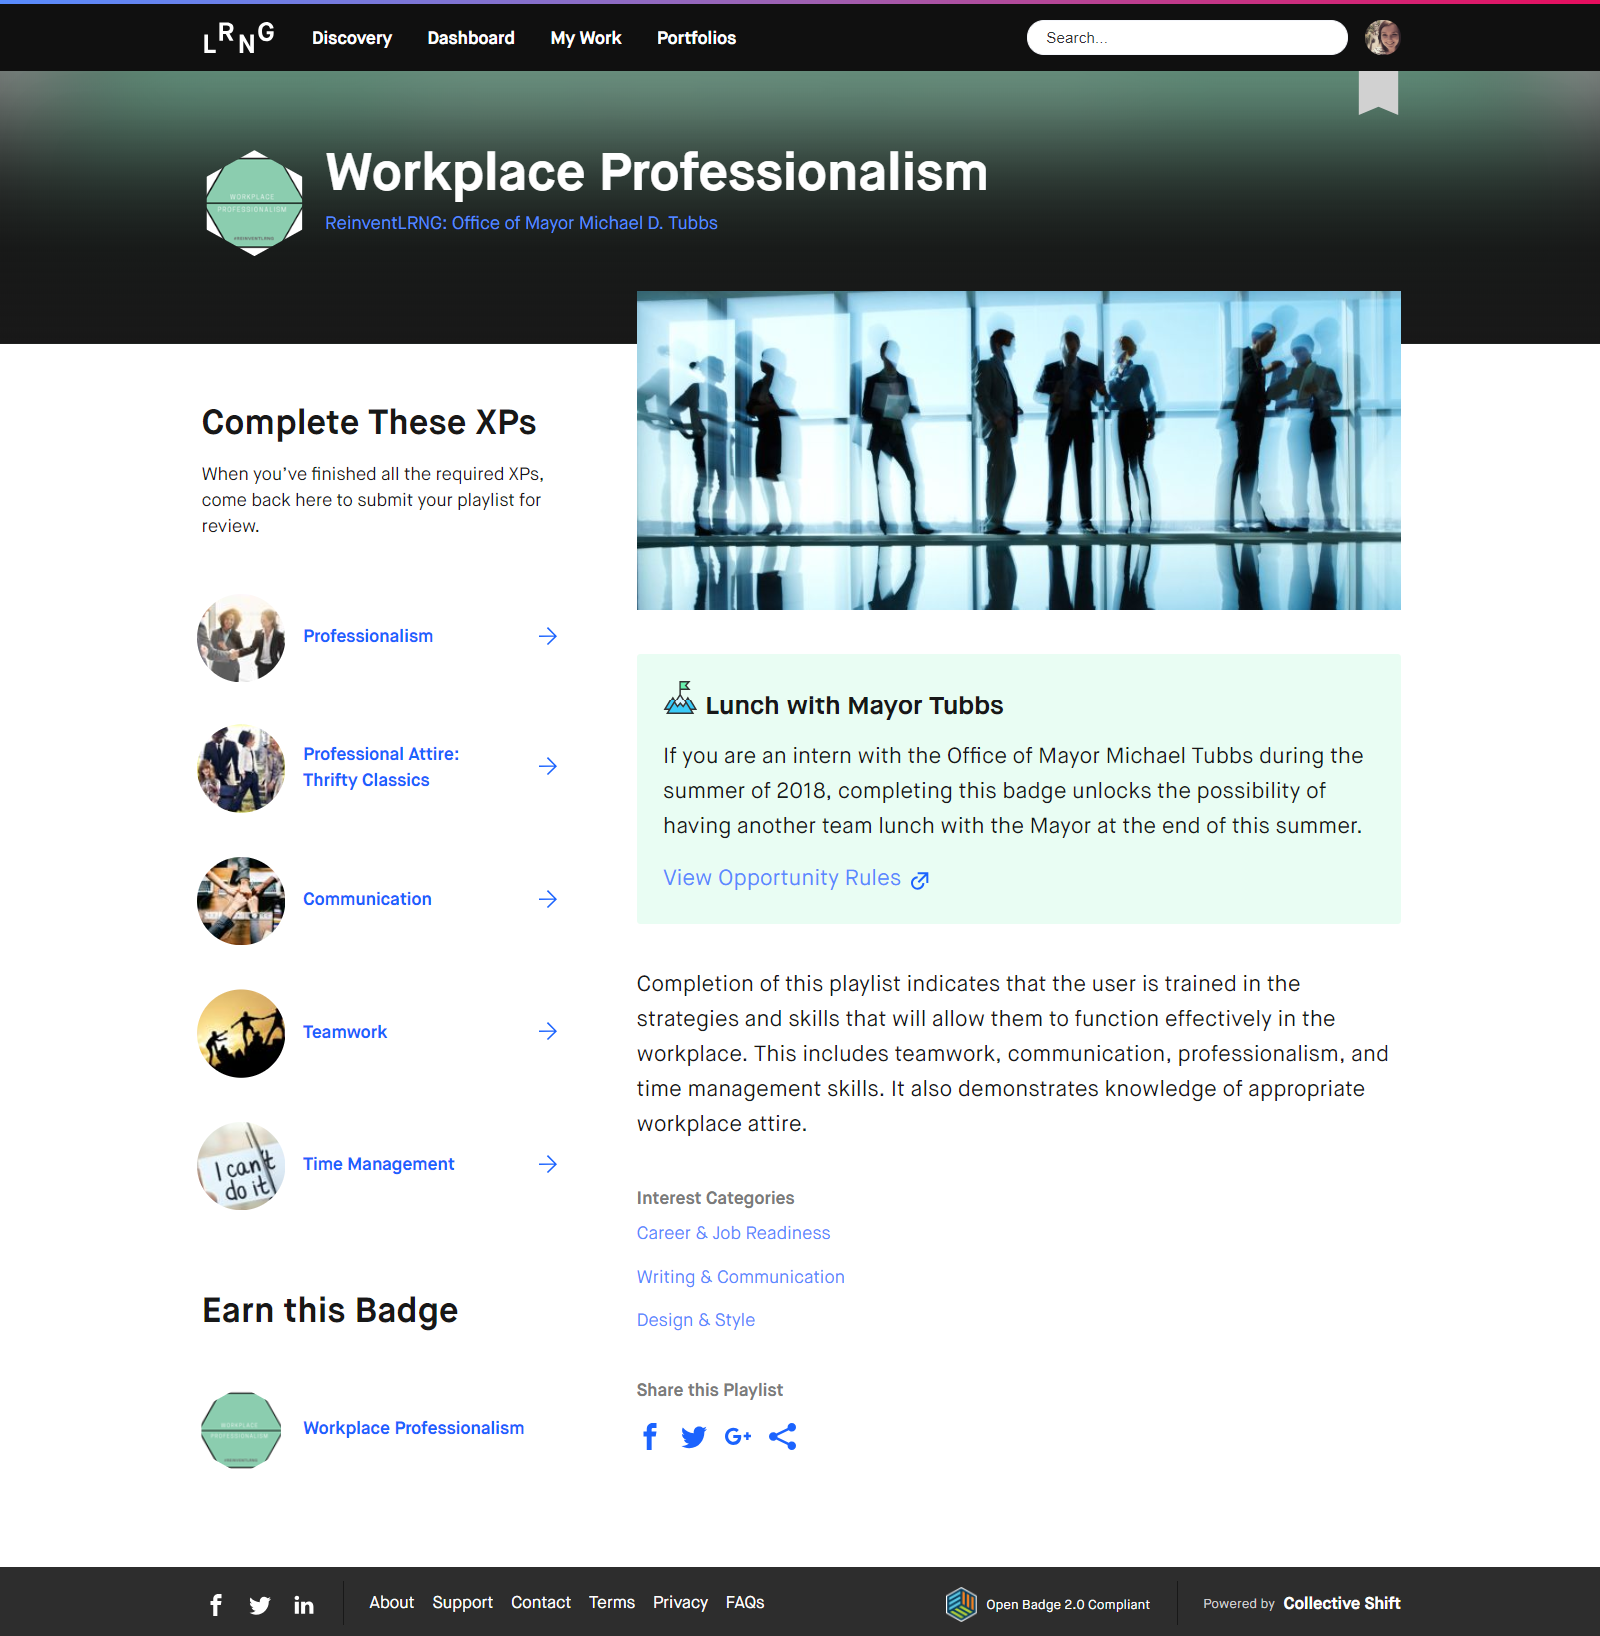 A screenshot of the "workplace professionalism" credential available through the LRNG platform. 